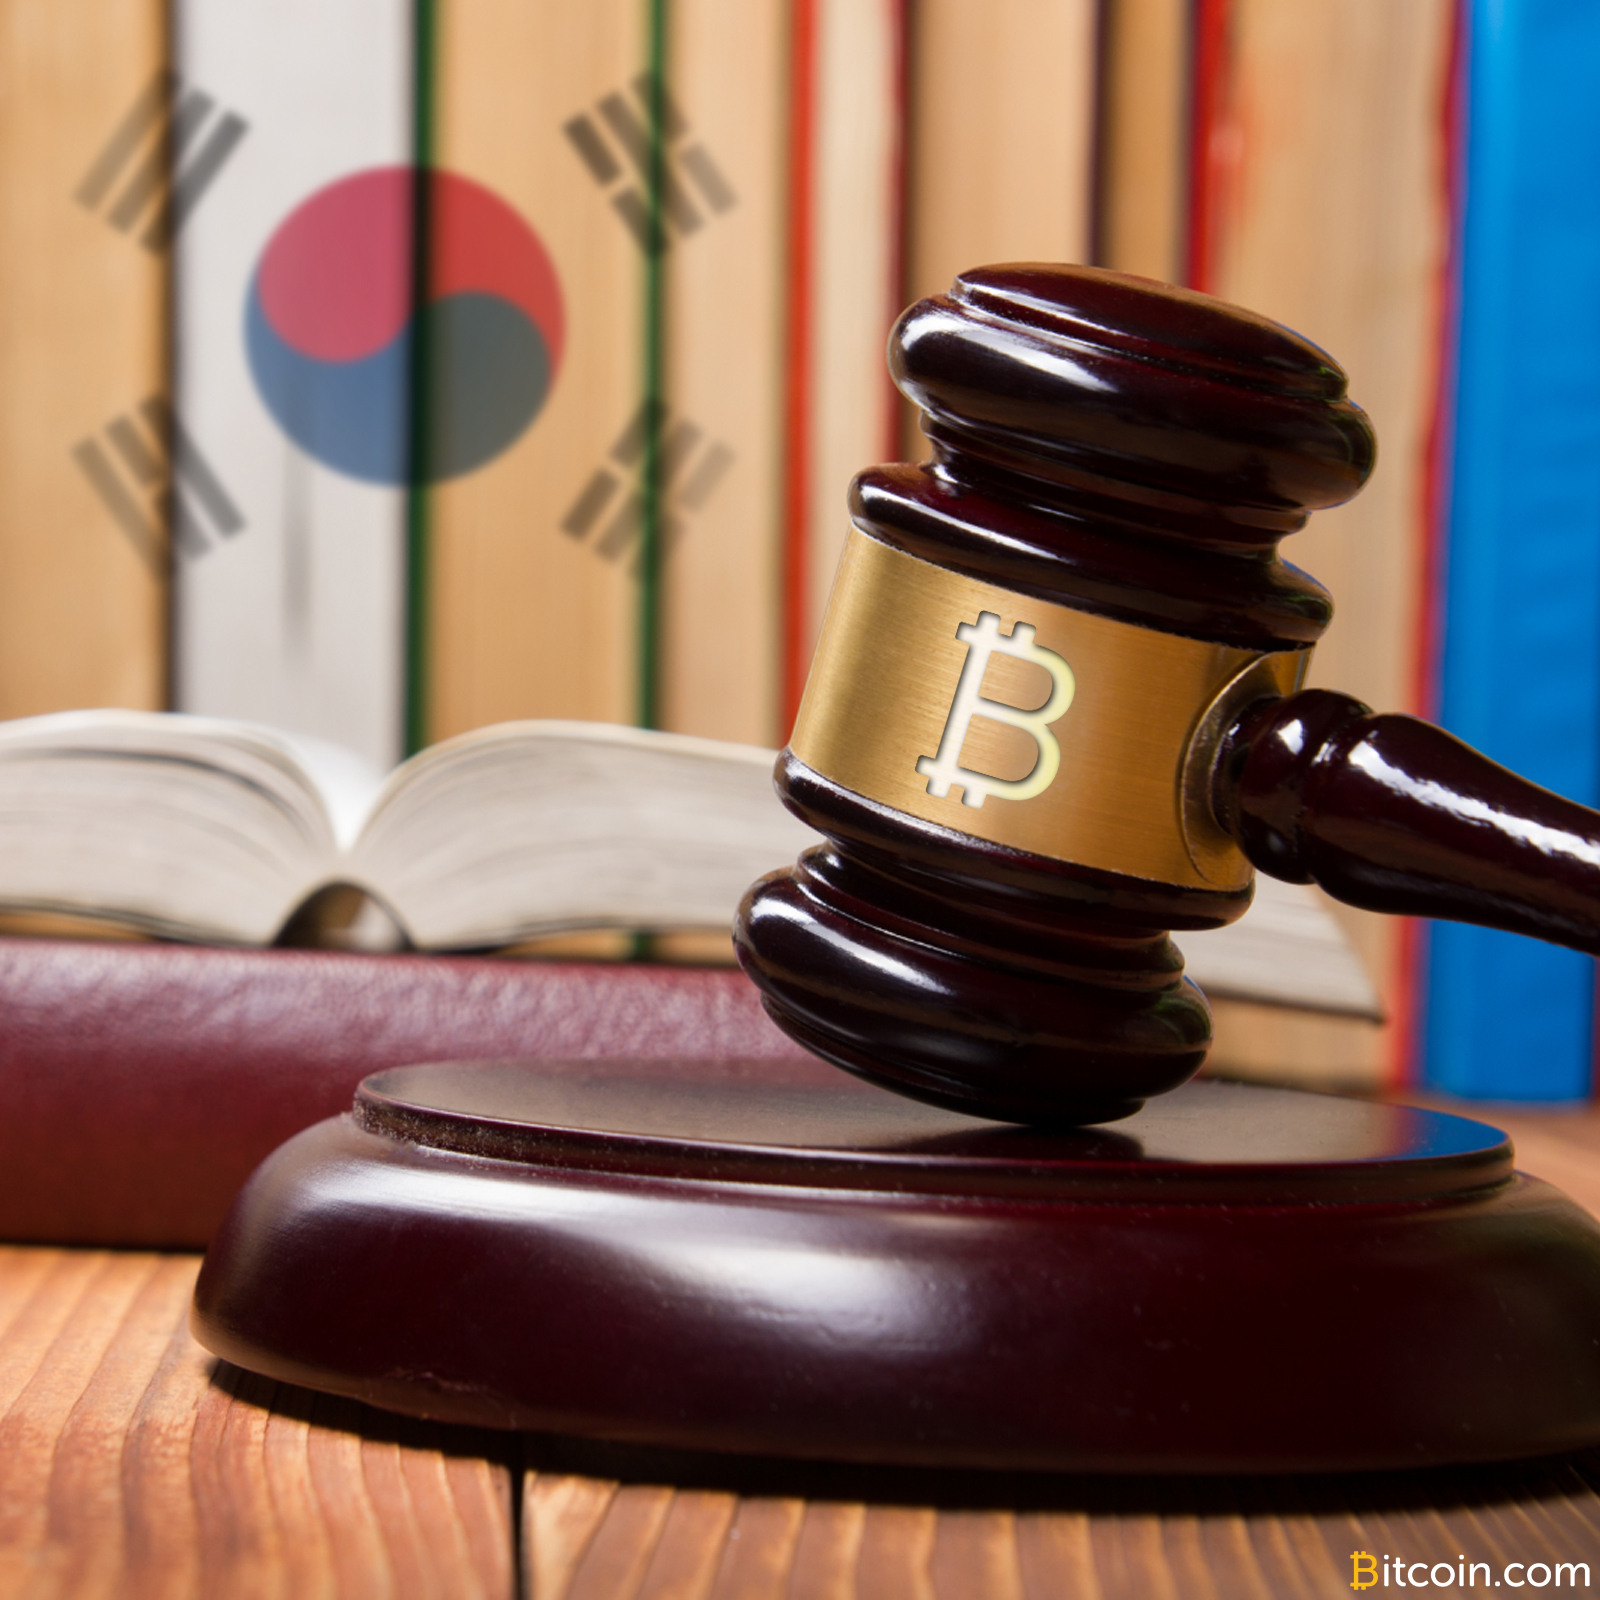 Korean Court Rules in Favor of Cryptocurrency Exchange Against Bank